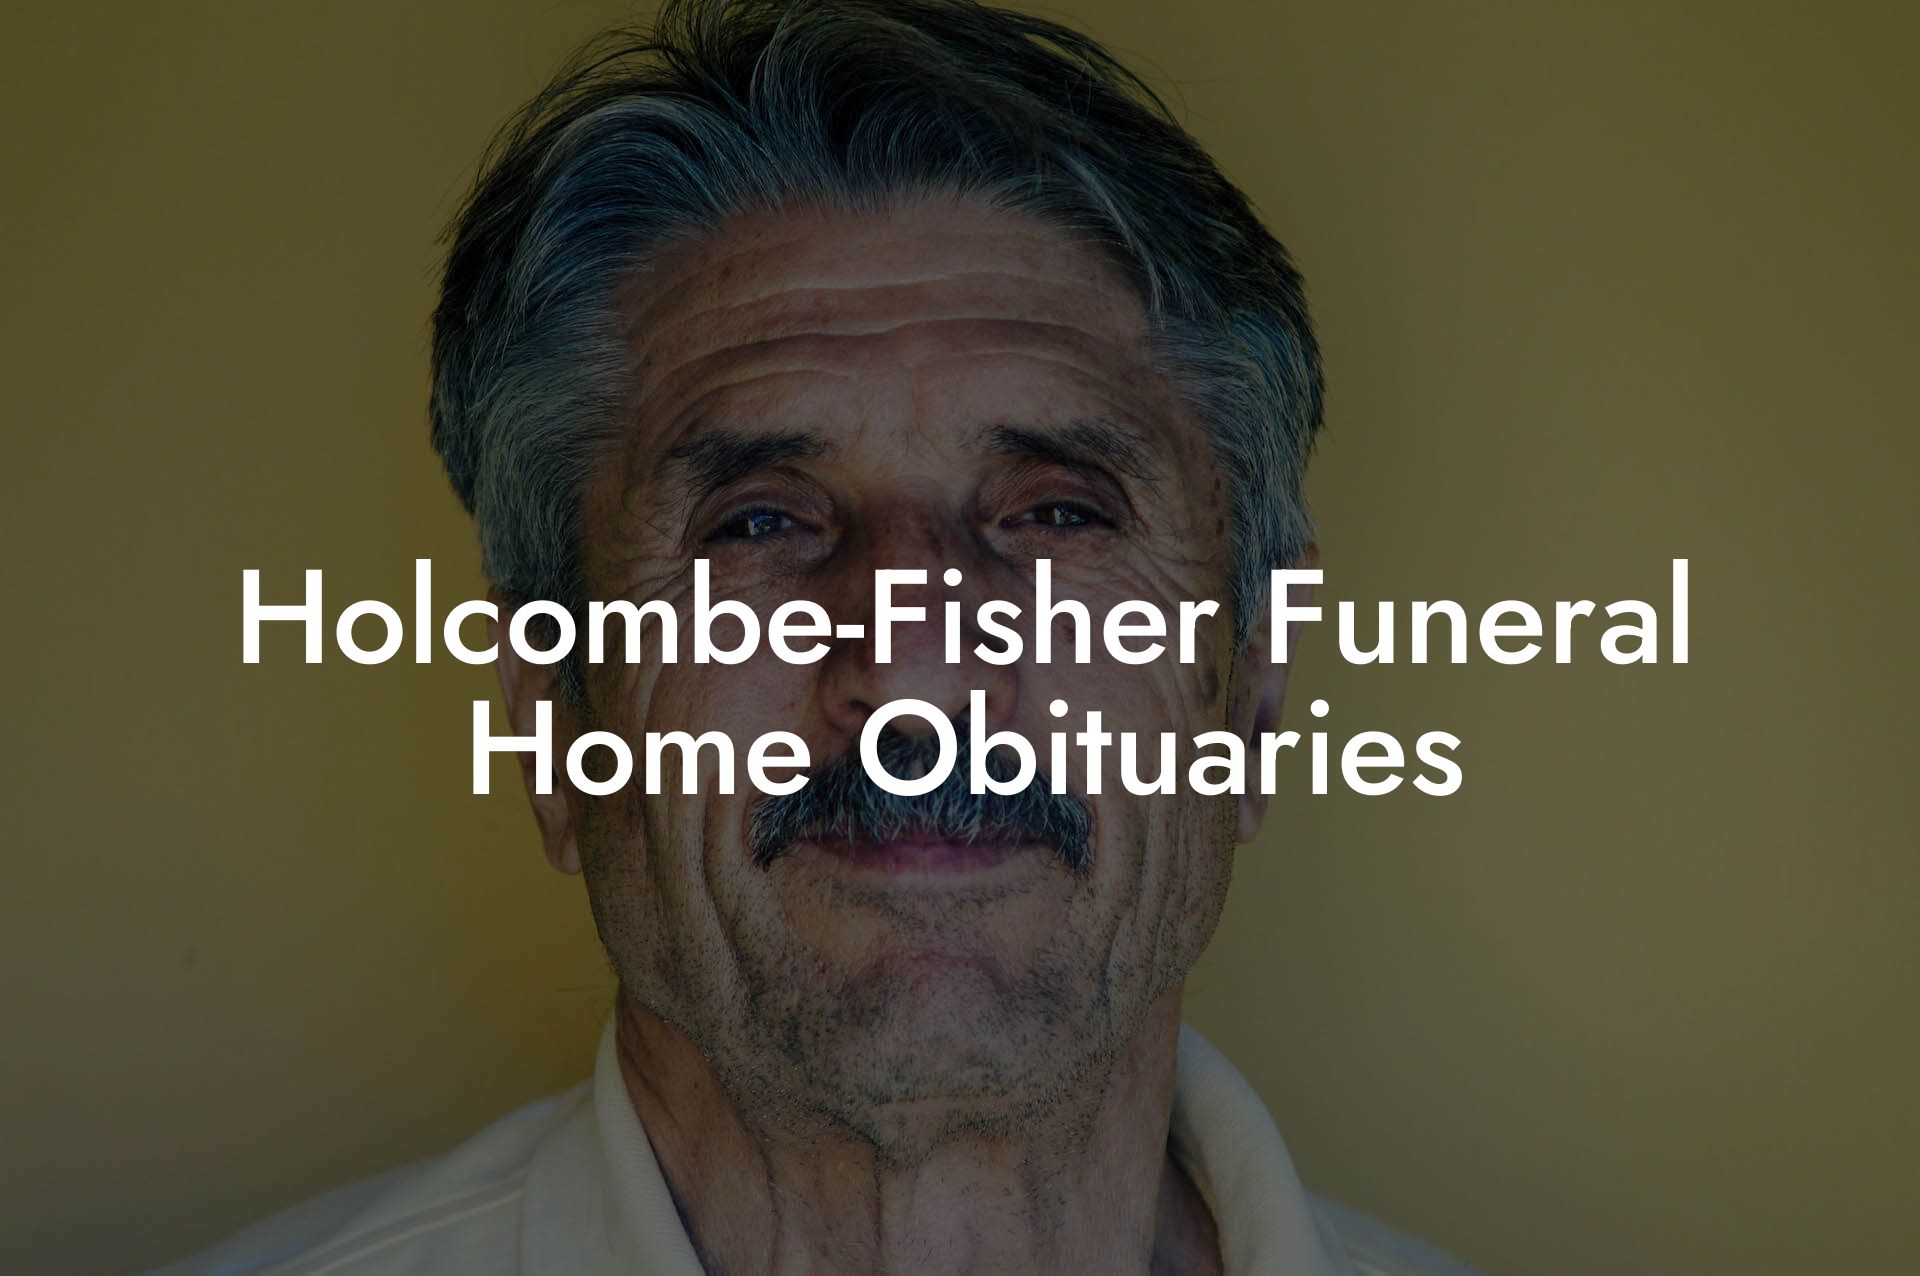 Holcombe-Fisher Funeral Home Obituaries